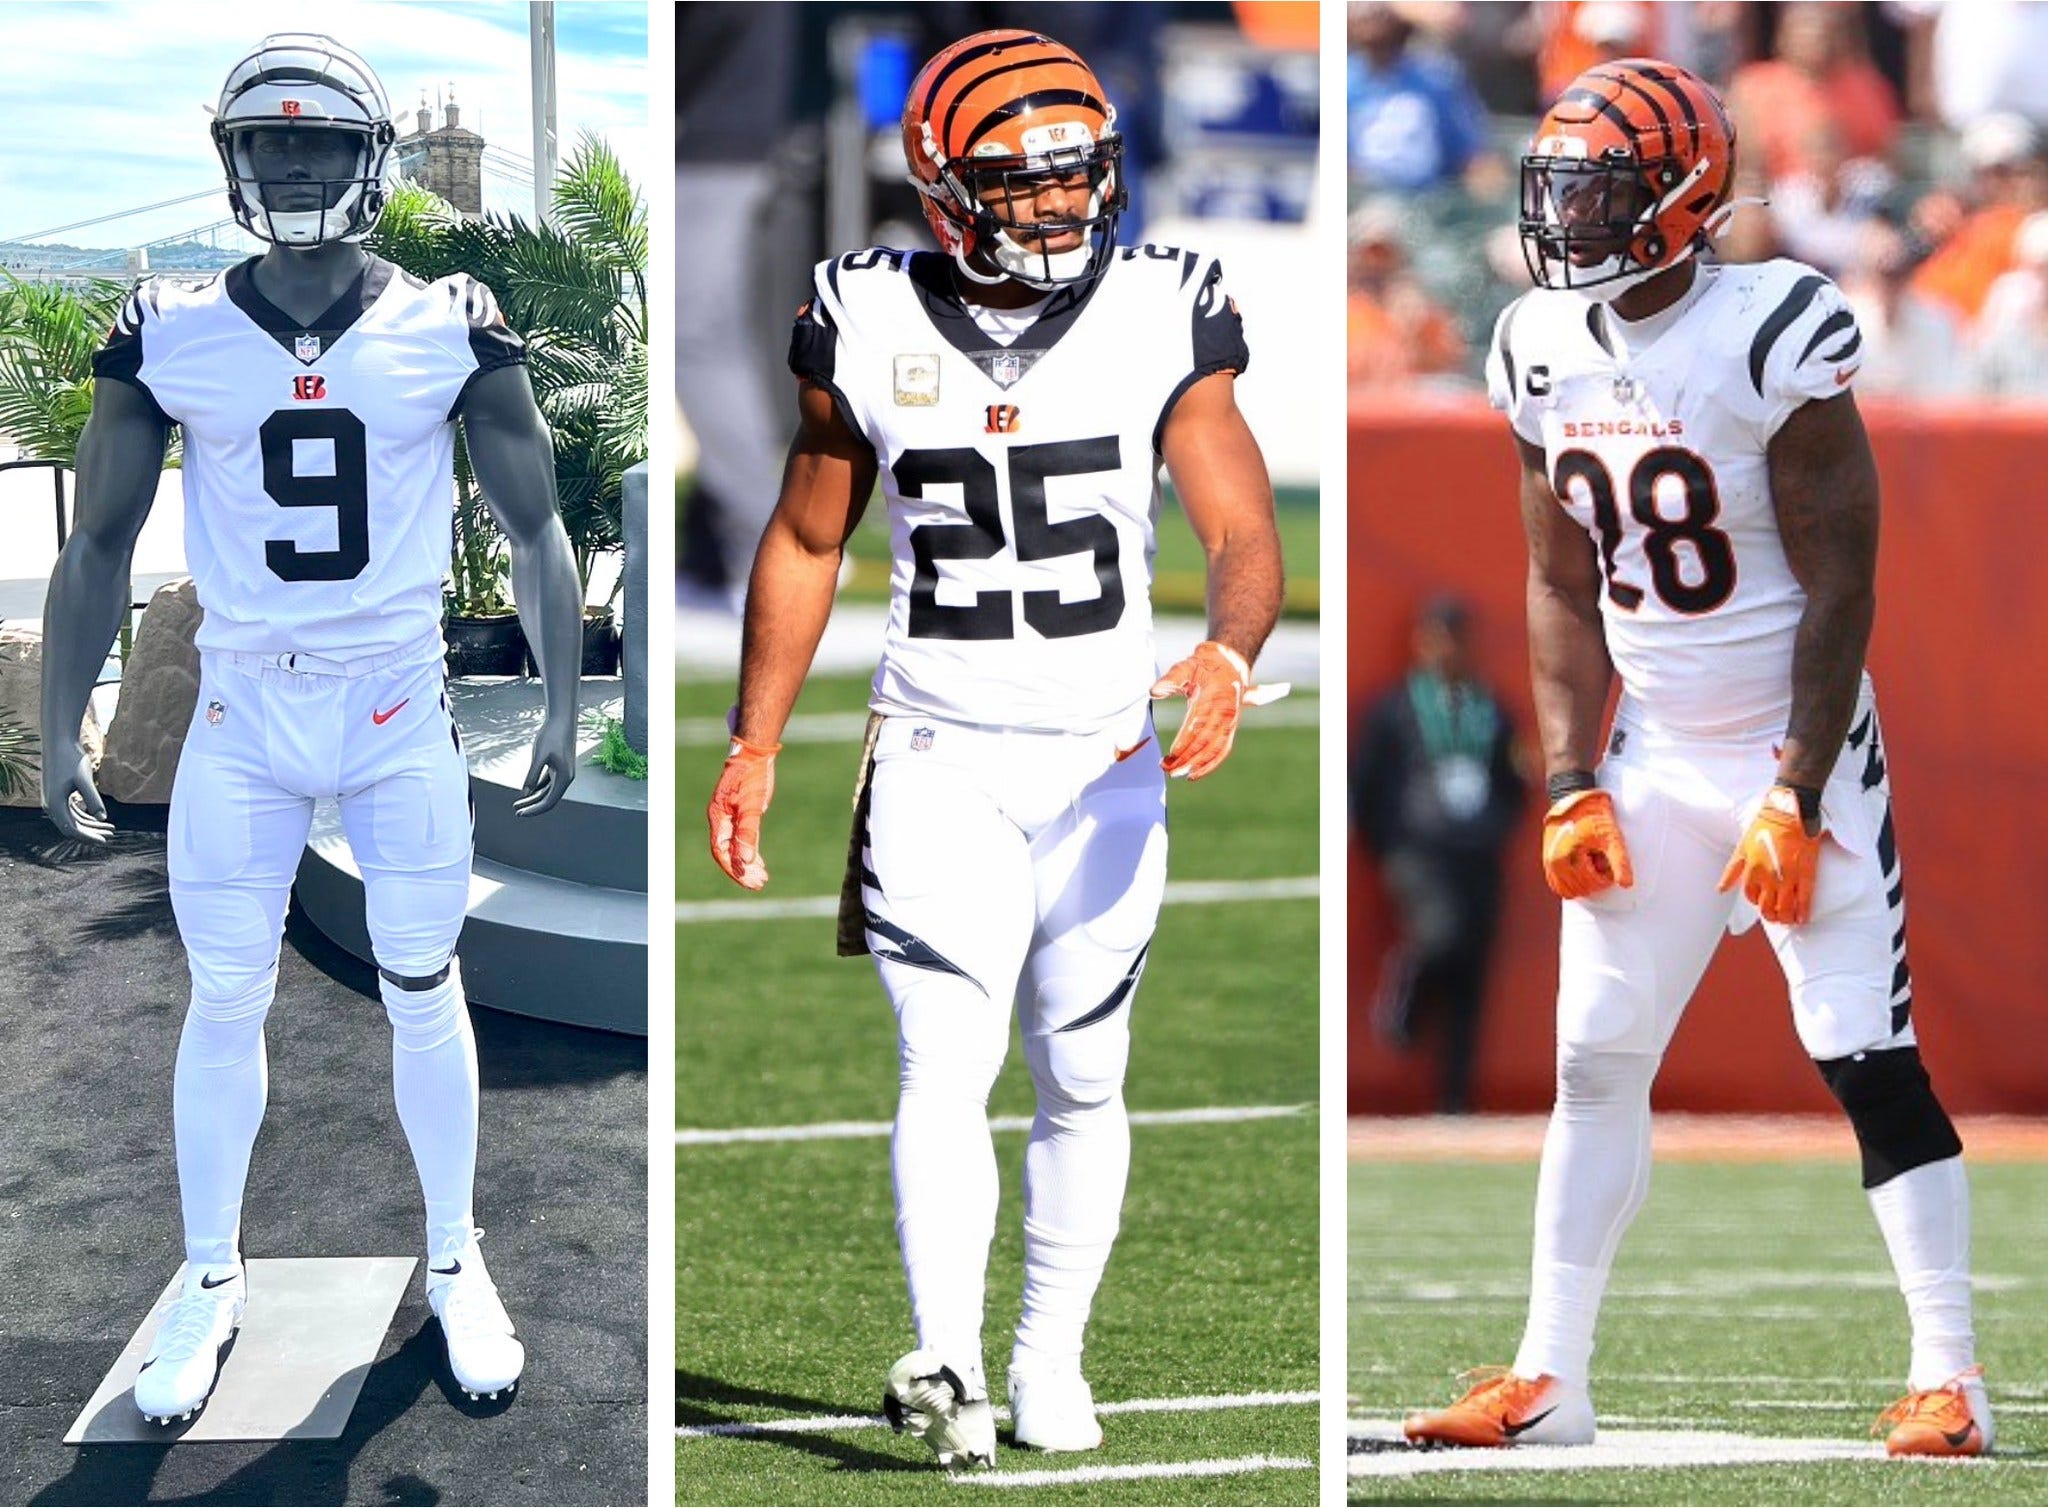 Bengals will pair color rush jerseys with new white helmets in